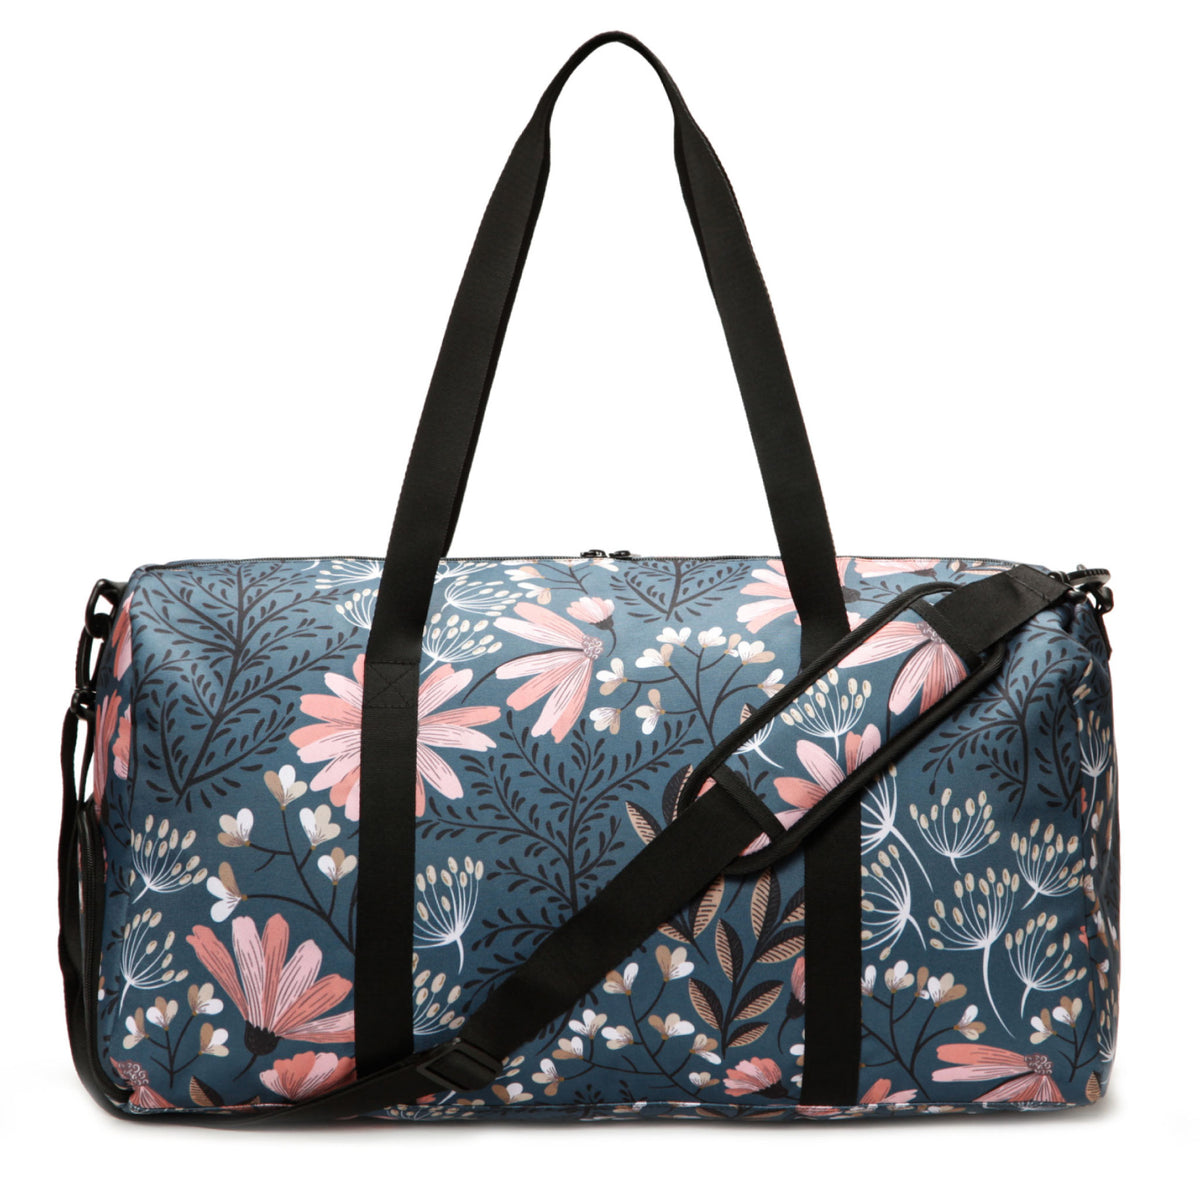 Jadyn Weekender Women's Large 52L Duffel Bag with Shoe Compartment - Black  Floral